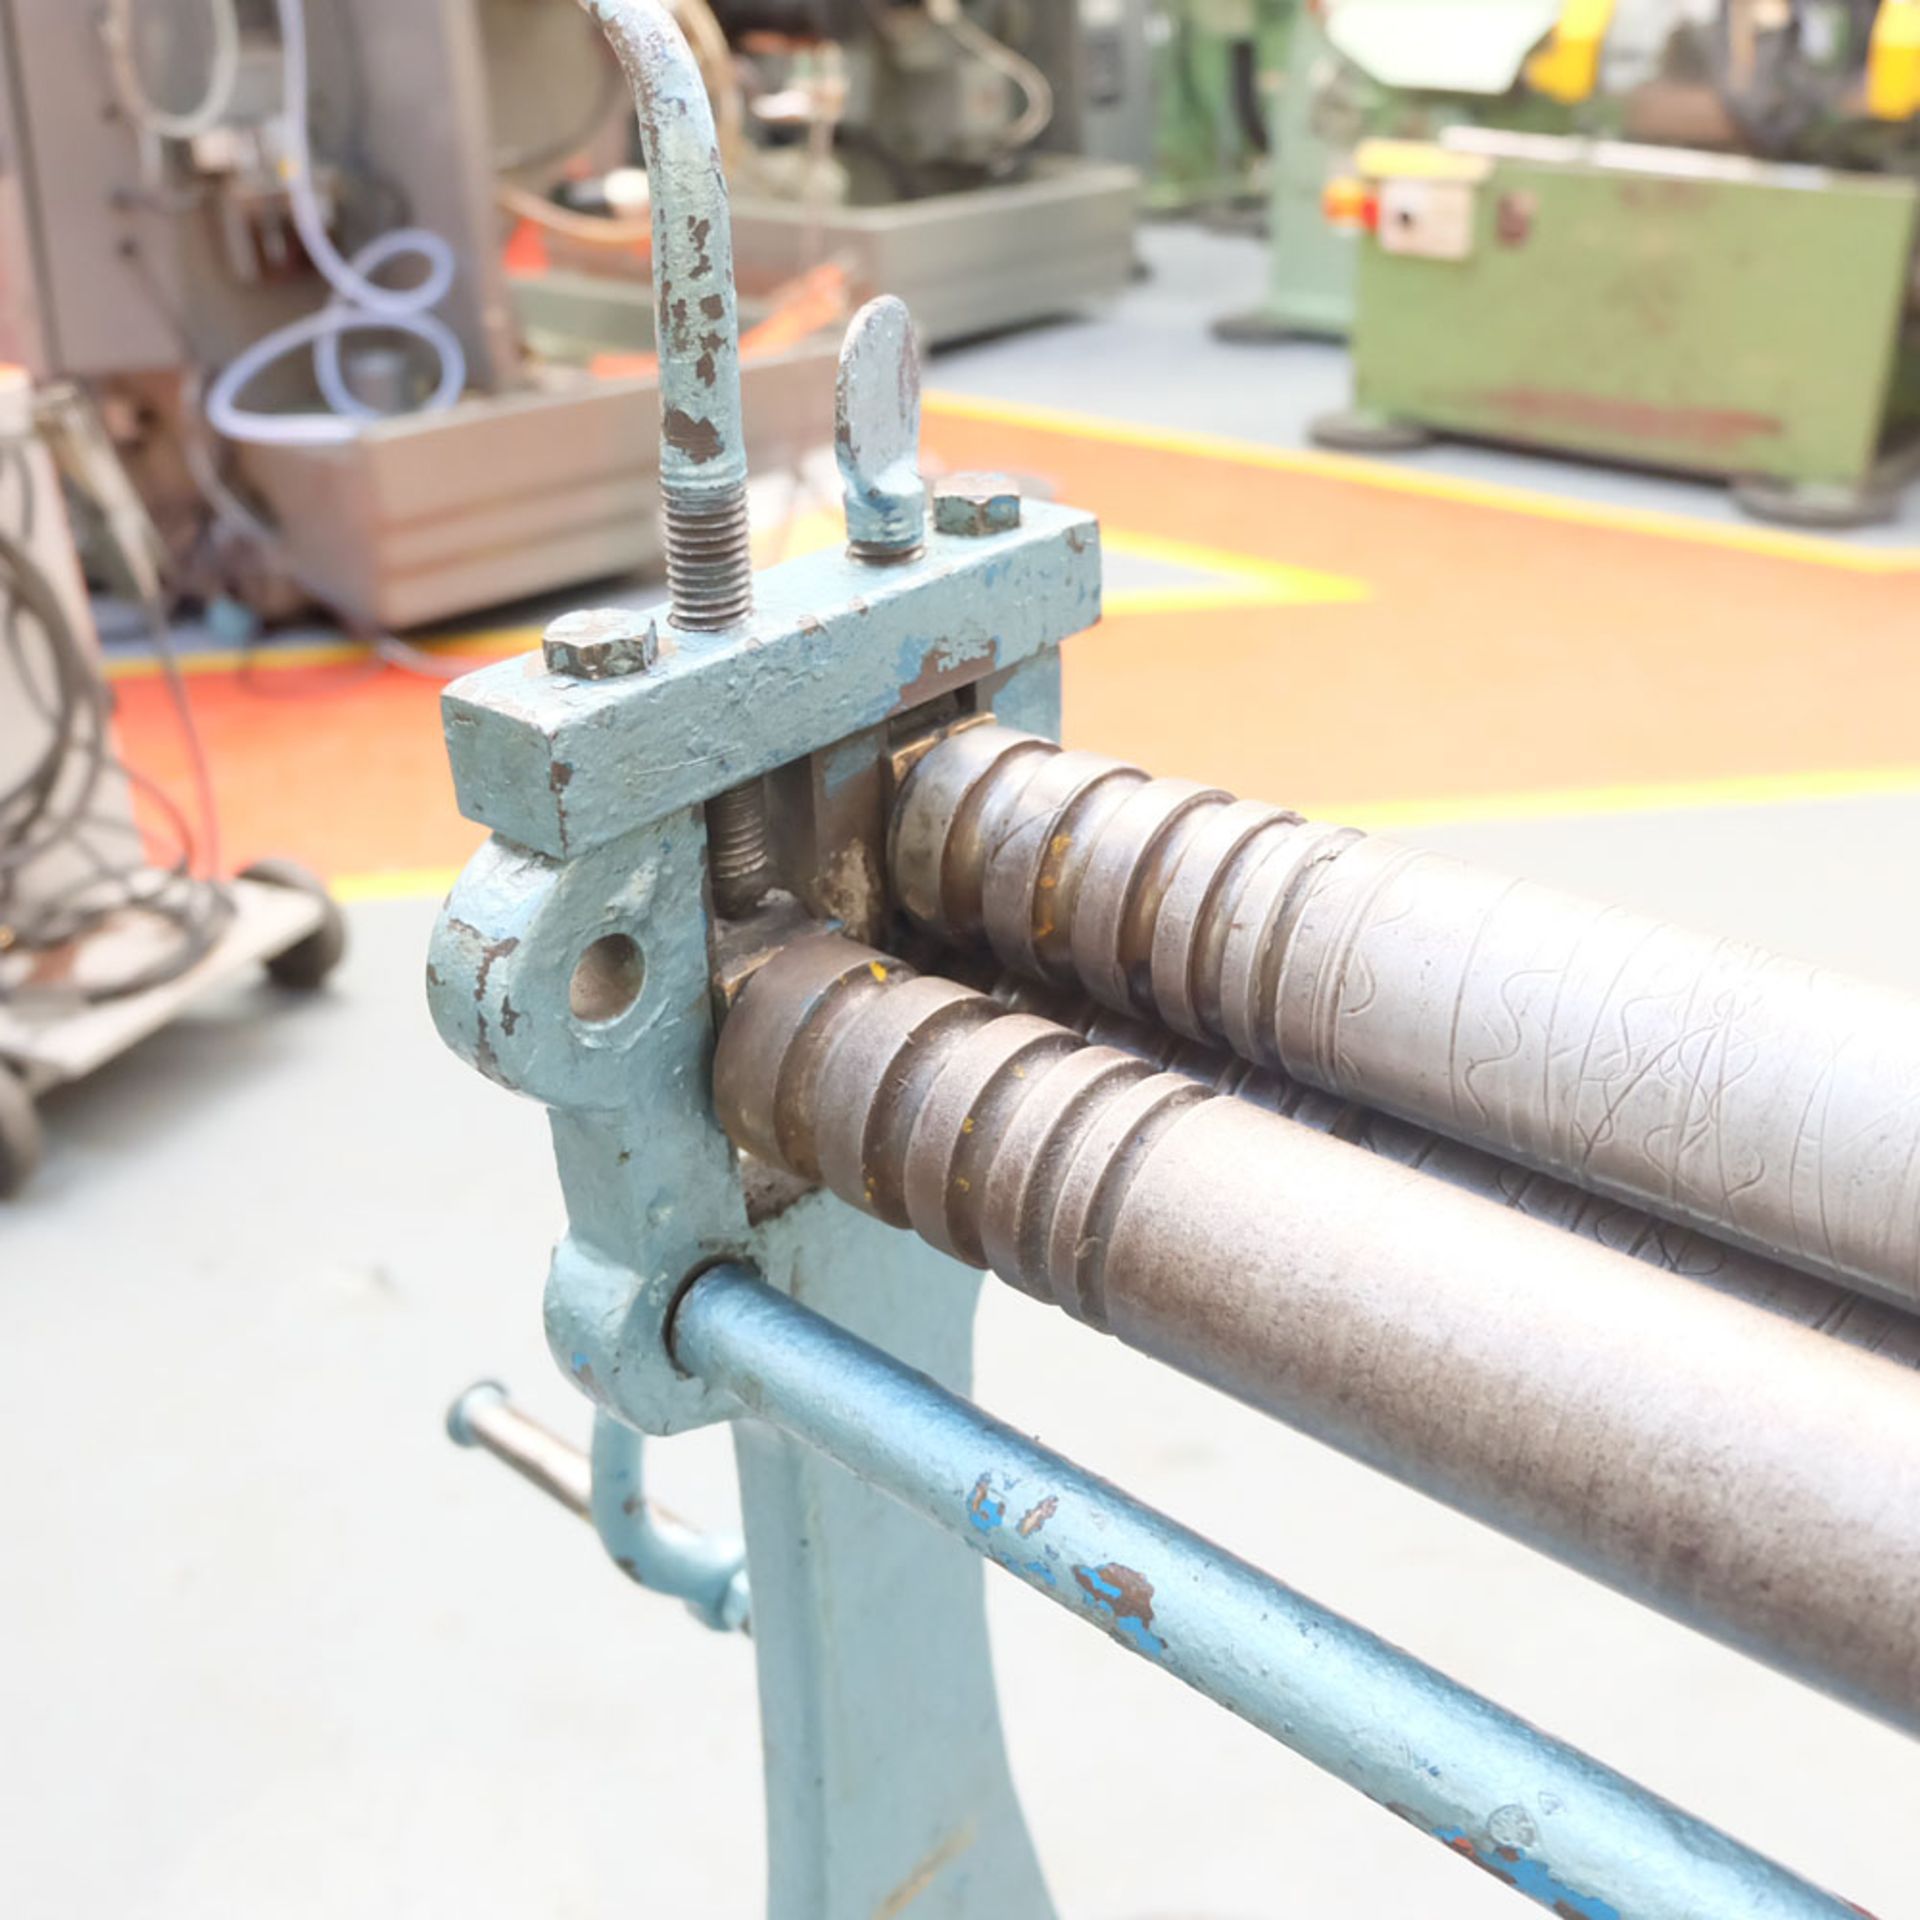 A Set of EDWARDS Initial Pinch Sheet Metal Rolls: Length of Rolls 30in, Diameter of Rolls 1.75in. - Image 5 of 6